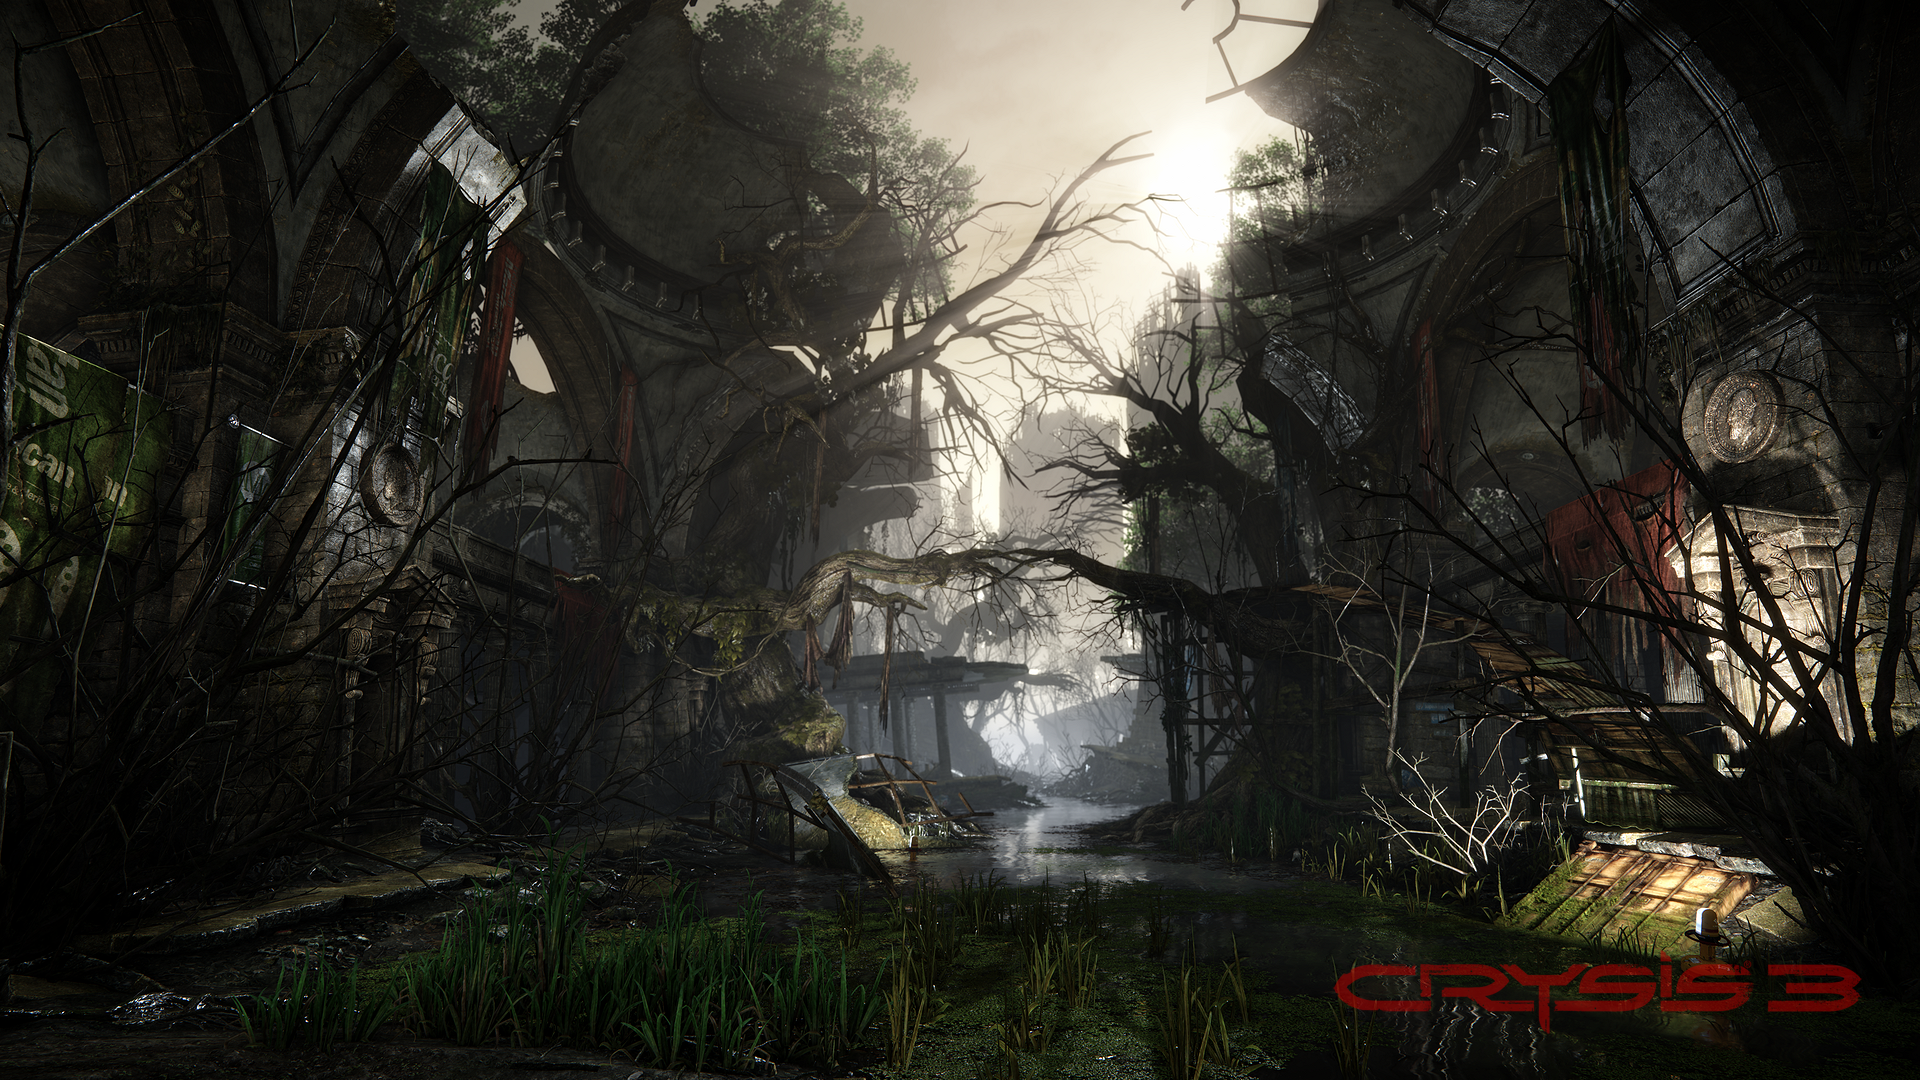 Media asset (photo, screenshot, or image in full size) related to contents posted at 3dfxzone.it | Image Name: news18970Crysis-3-screenshots_3.png